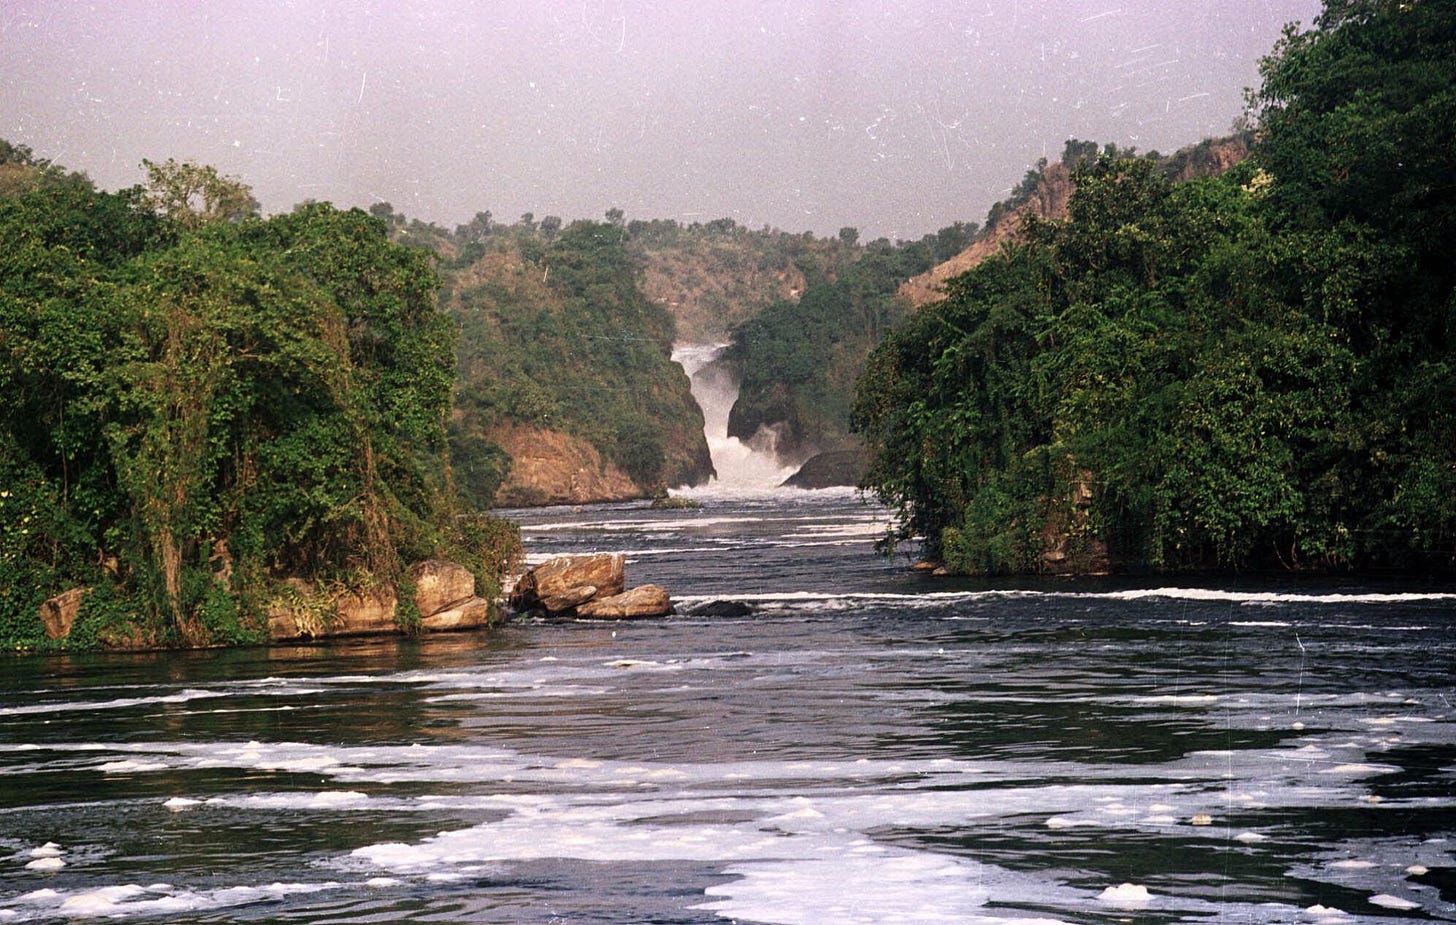 The Victoria Nile, which rises in Lake Victoria, plunges down a ravine on its long journey to the Mediterranean, in Uganda on December 12, 2000. When British explorer Samuel Baker came upon this explosion of water, he named it Murchison Falls in honour of the president of Britain’s Royal Geographical Society. Photo: AP